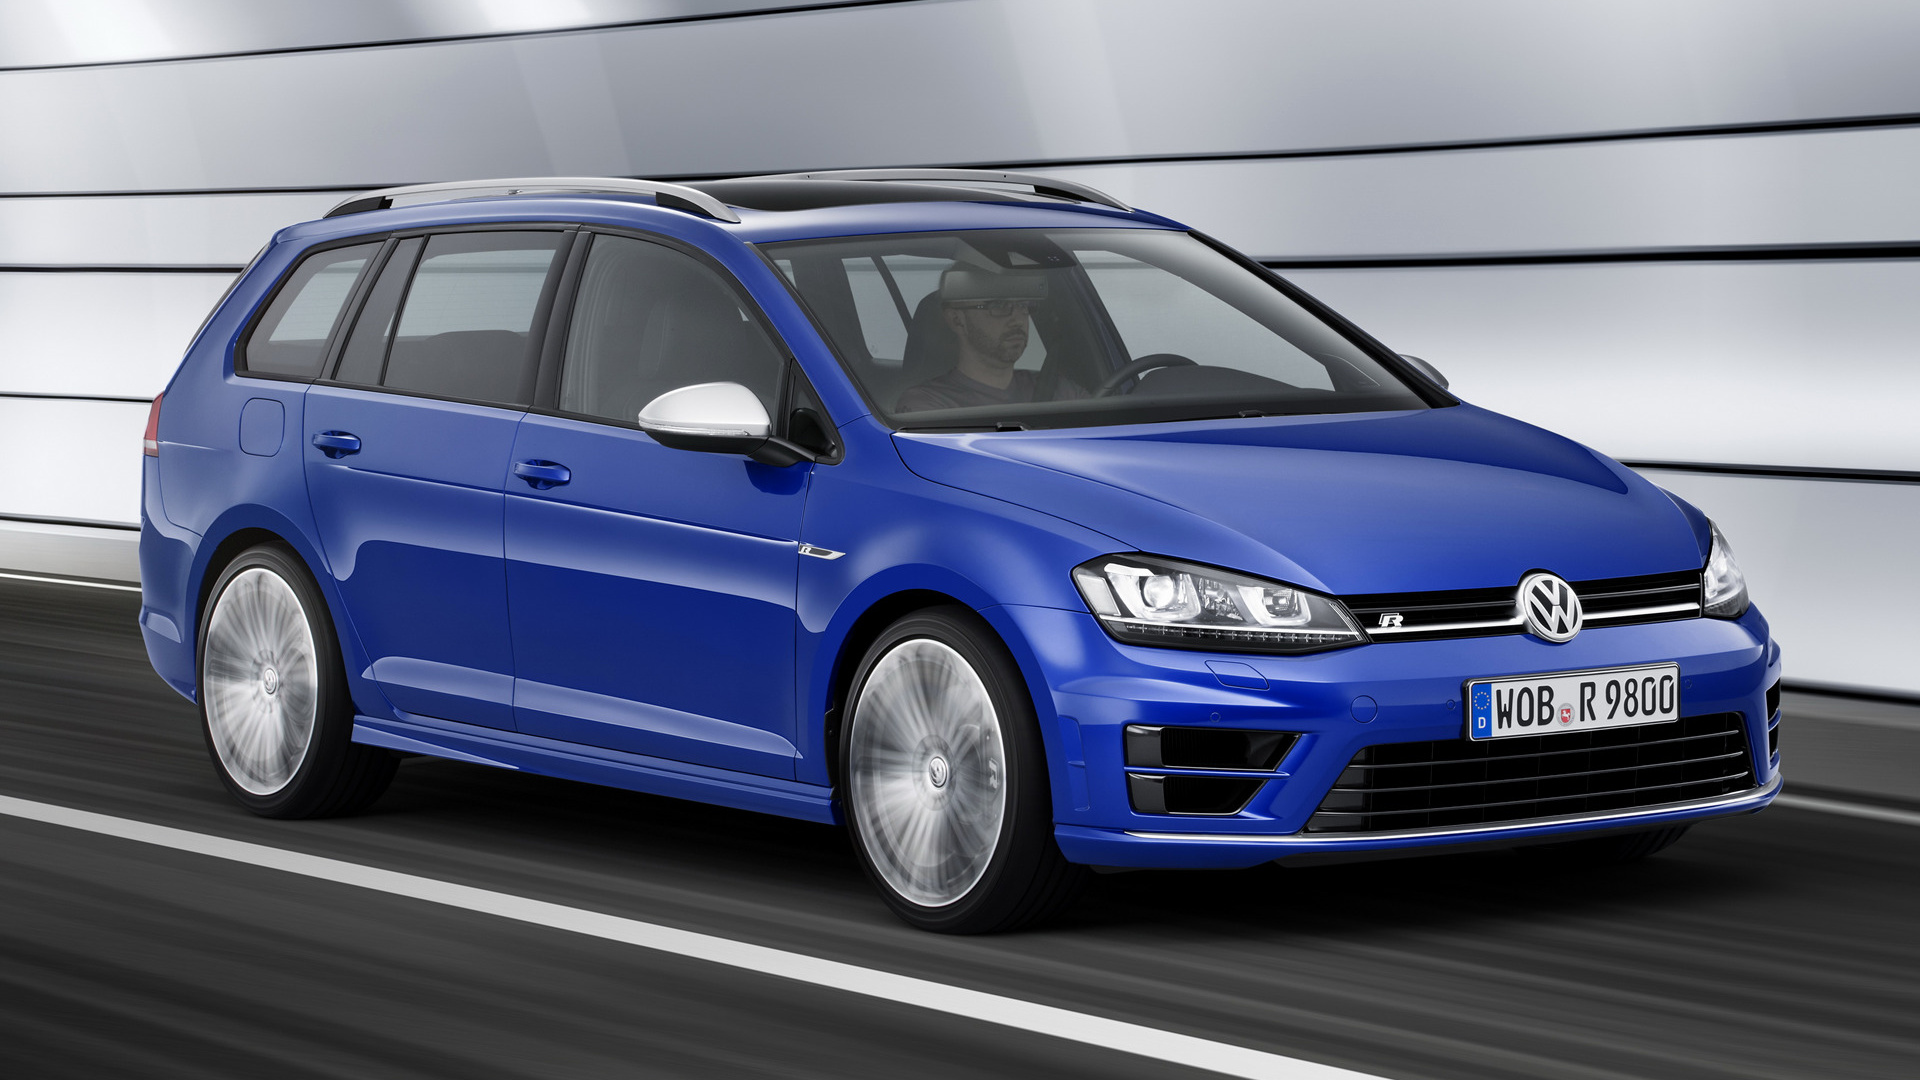 Volkswagen Golf R Variant 2015 Wallpapers and HD Images